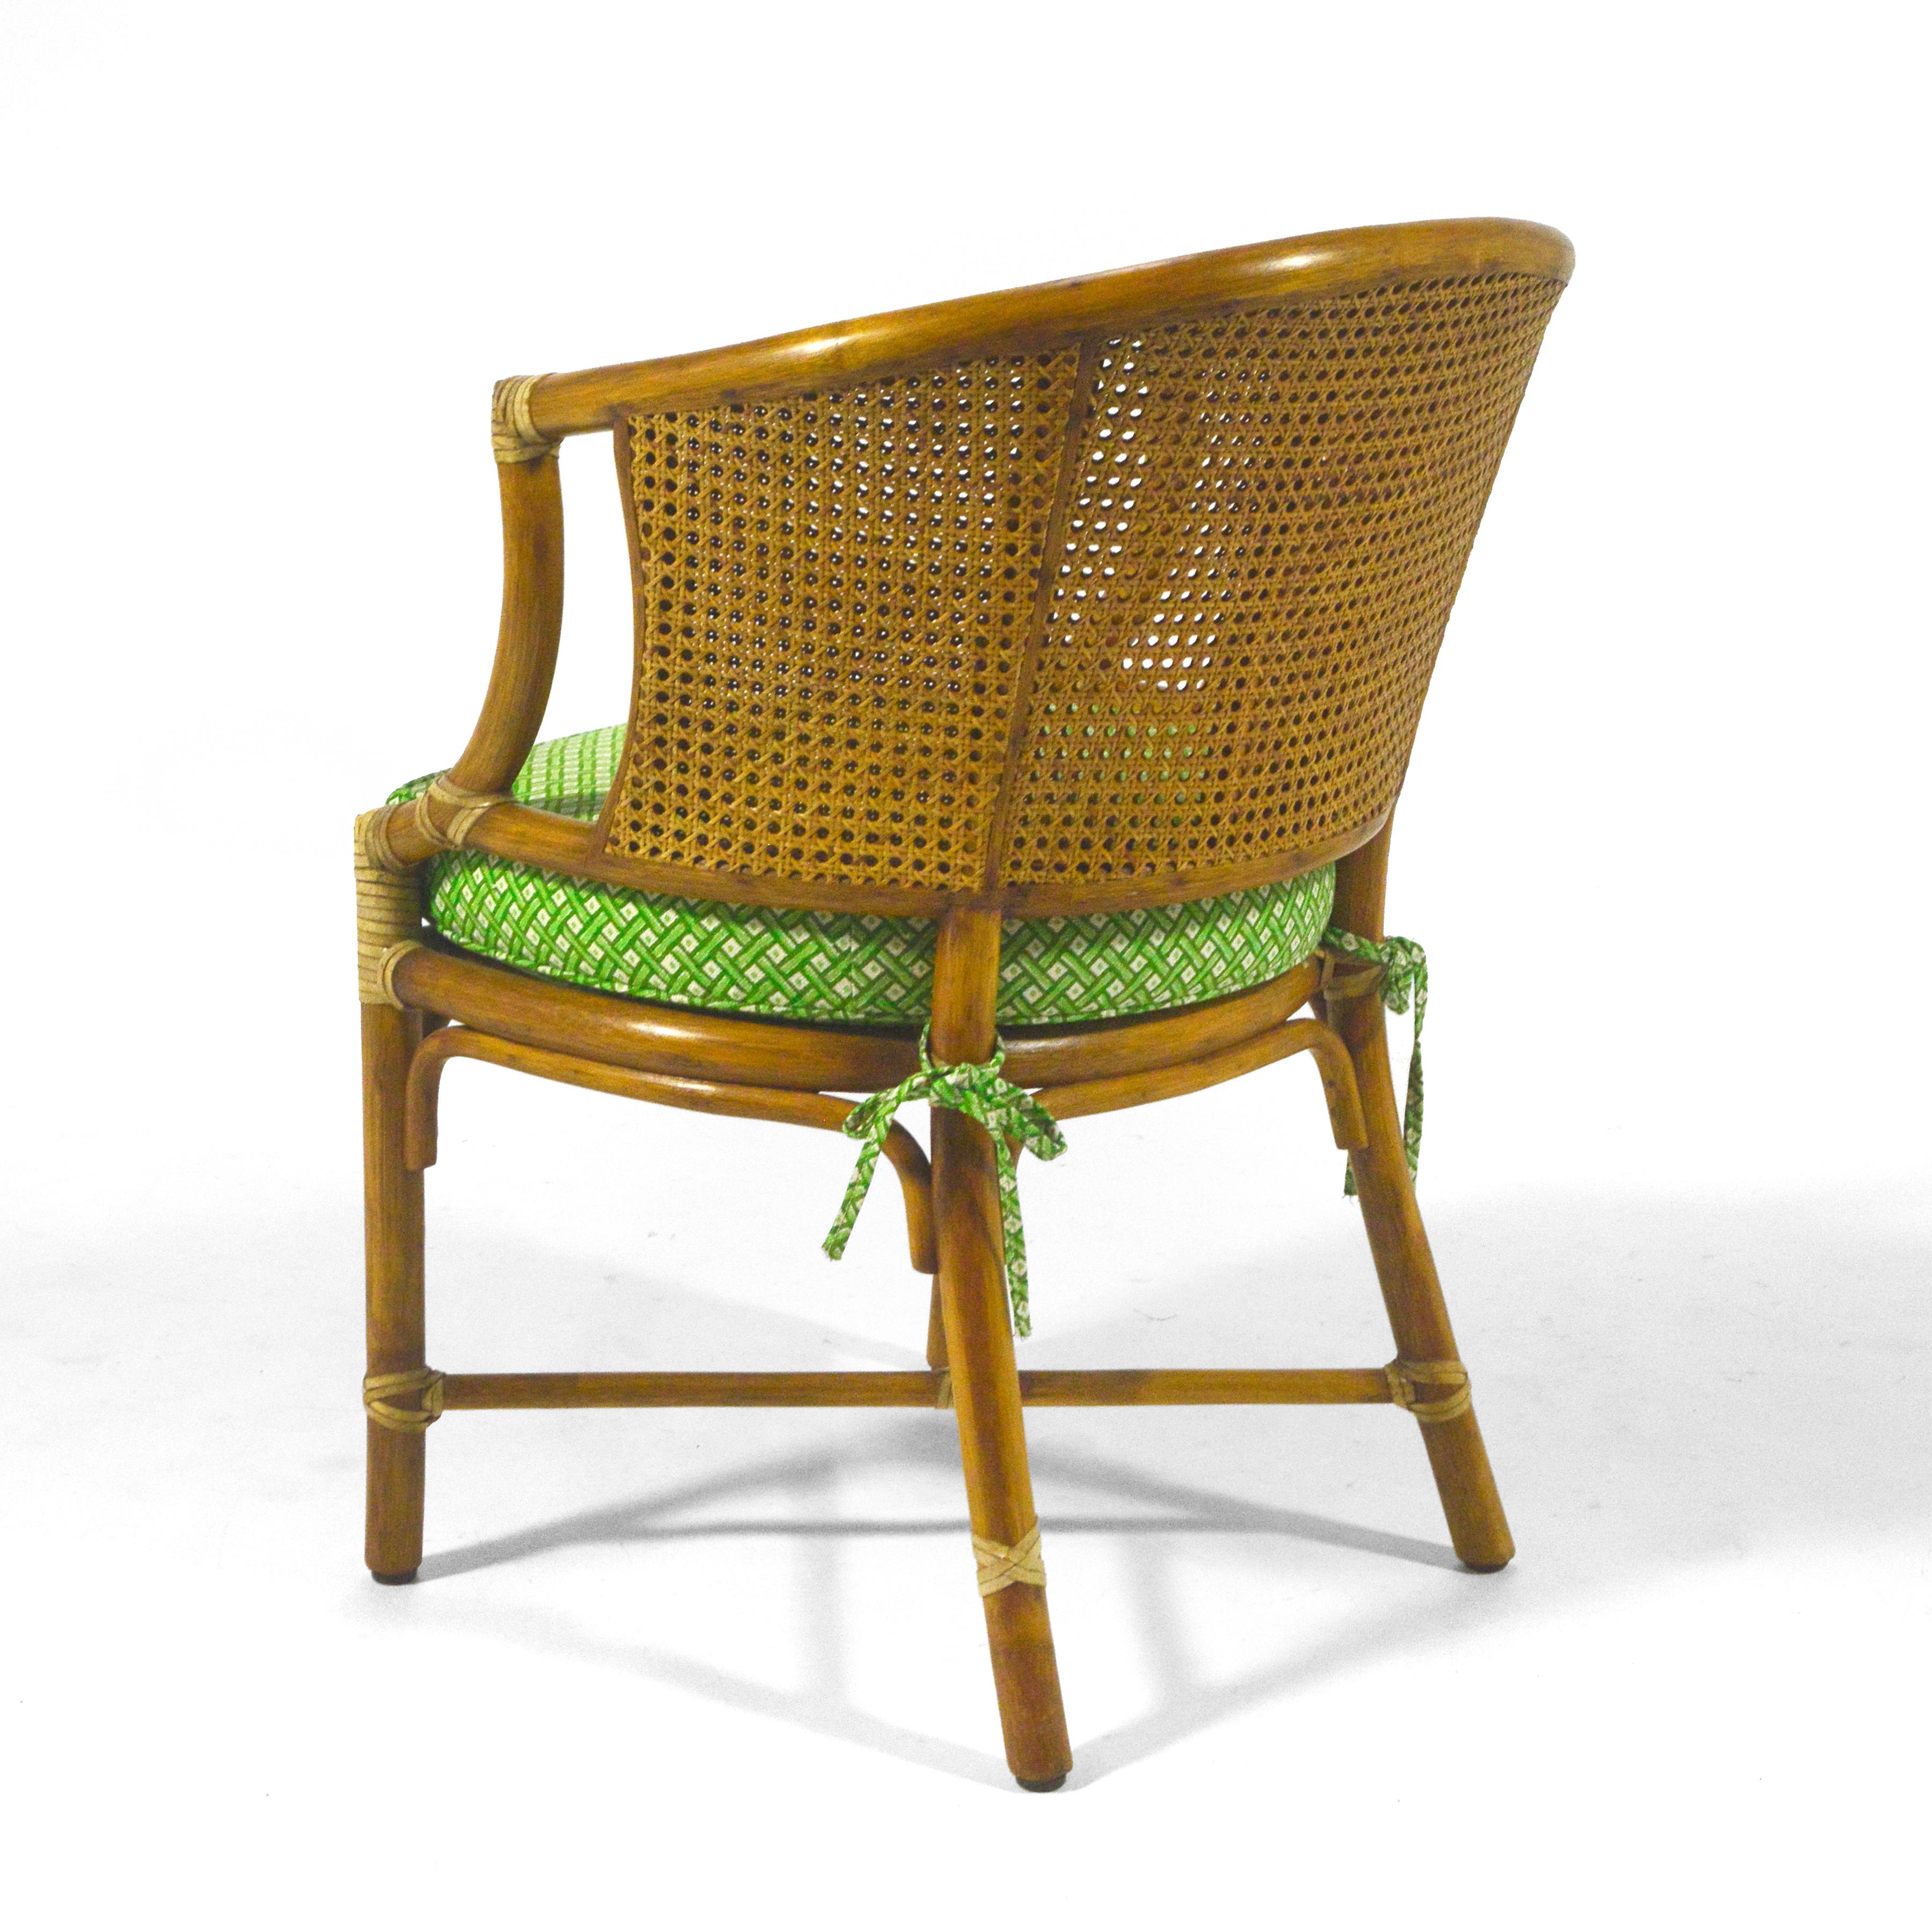 Elinor McGuire M-86 Rattan & Cane Chair For Sale 1